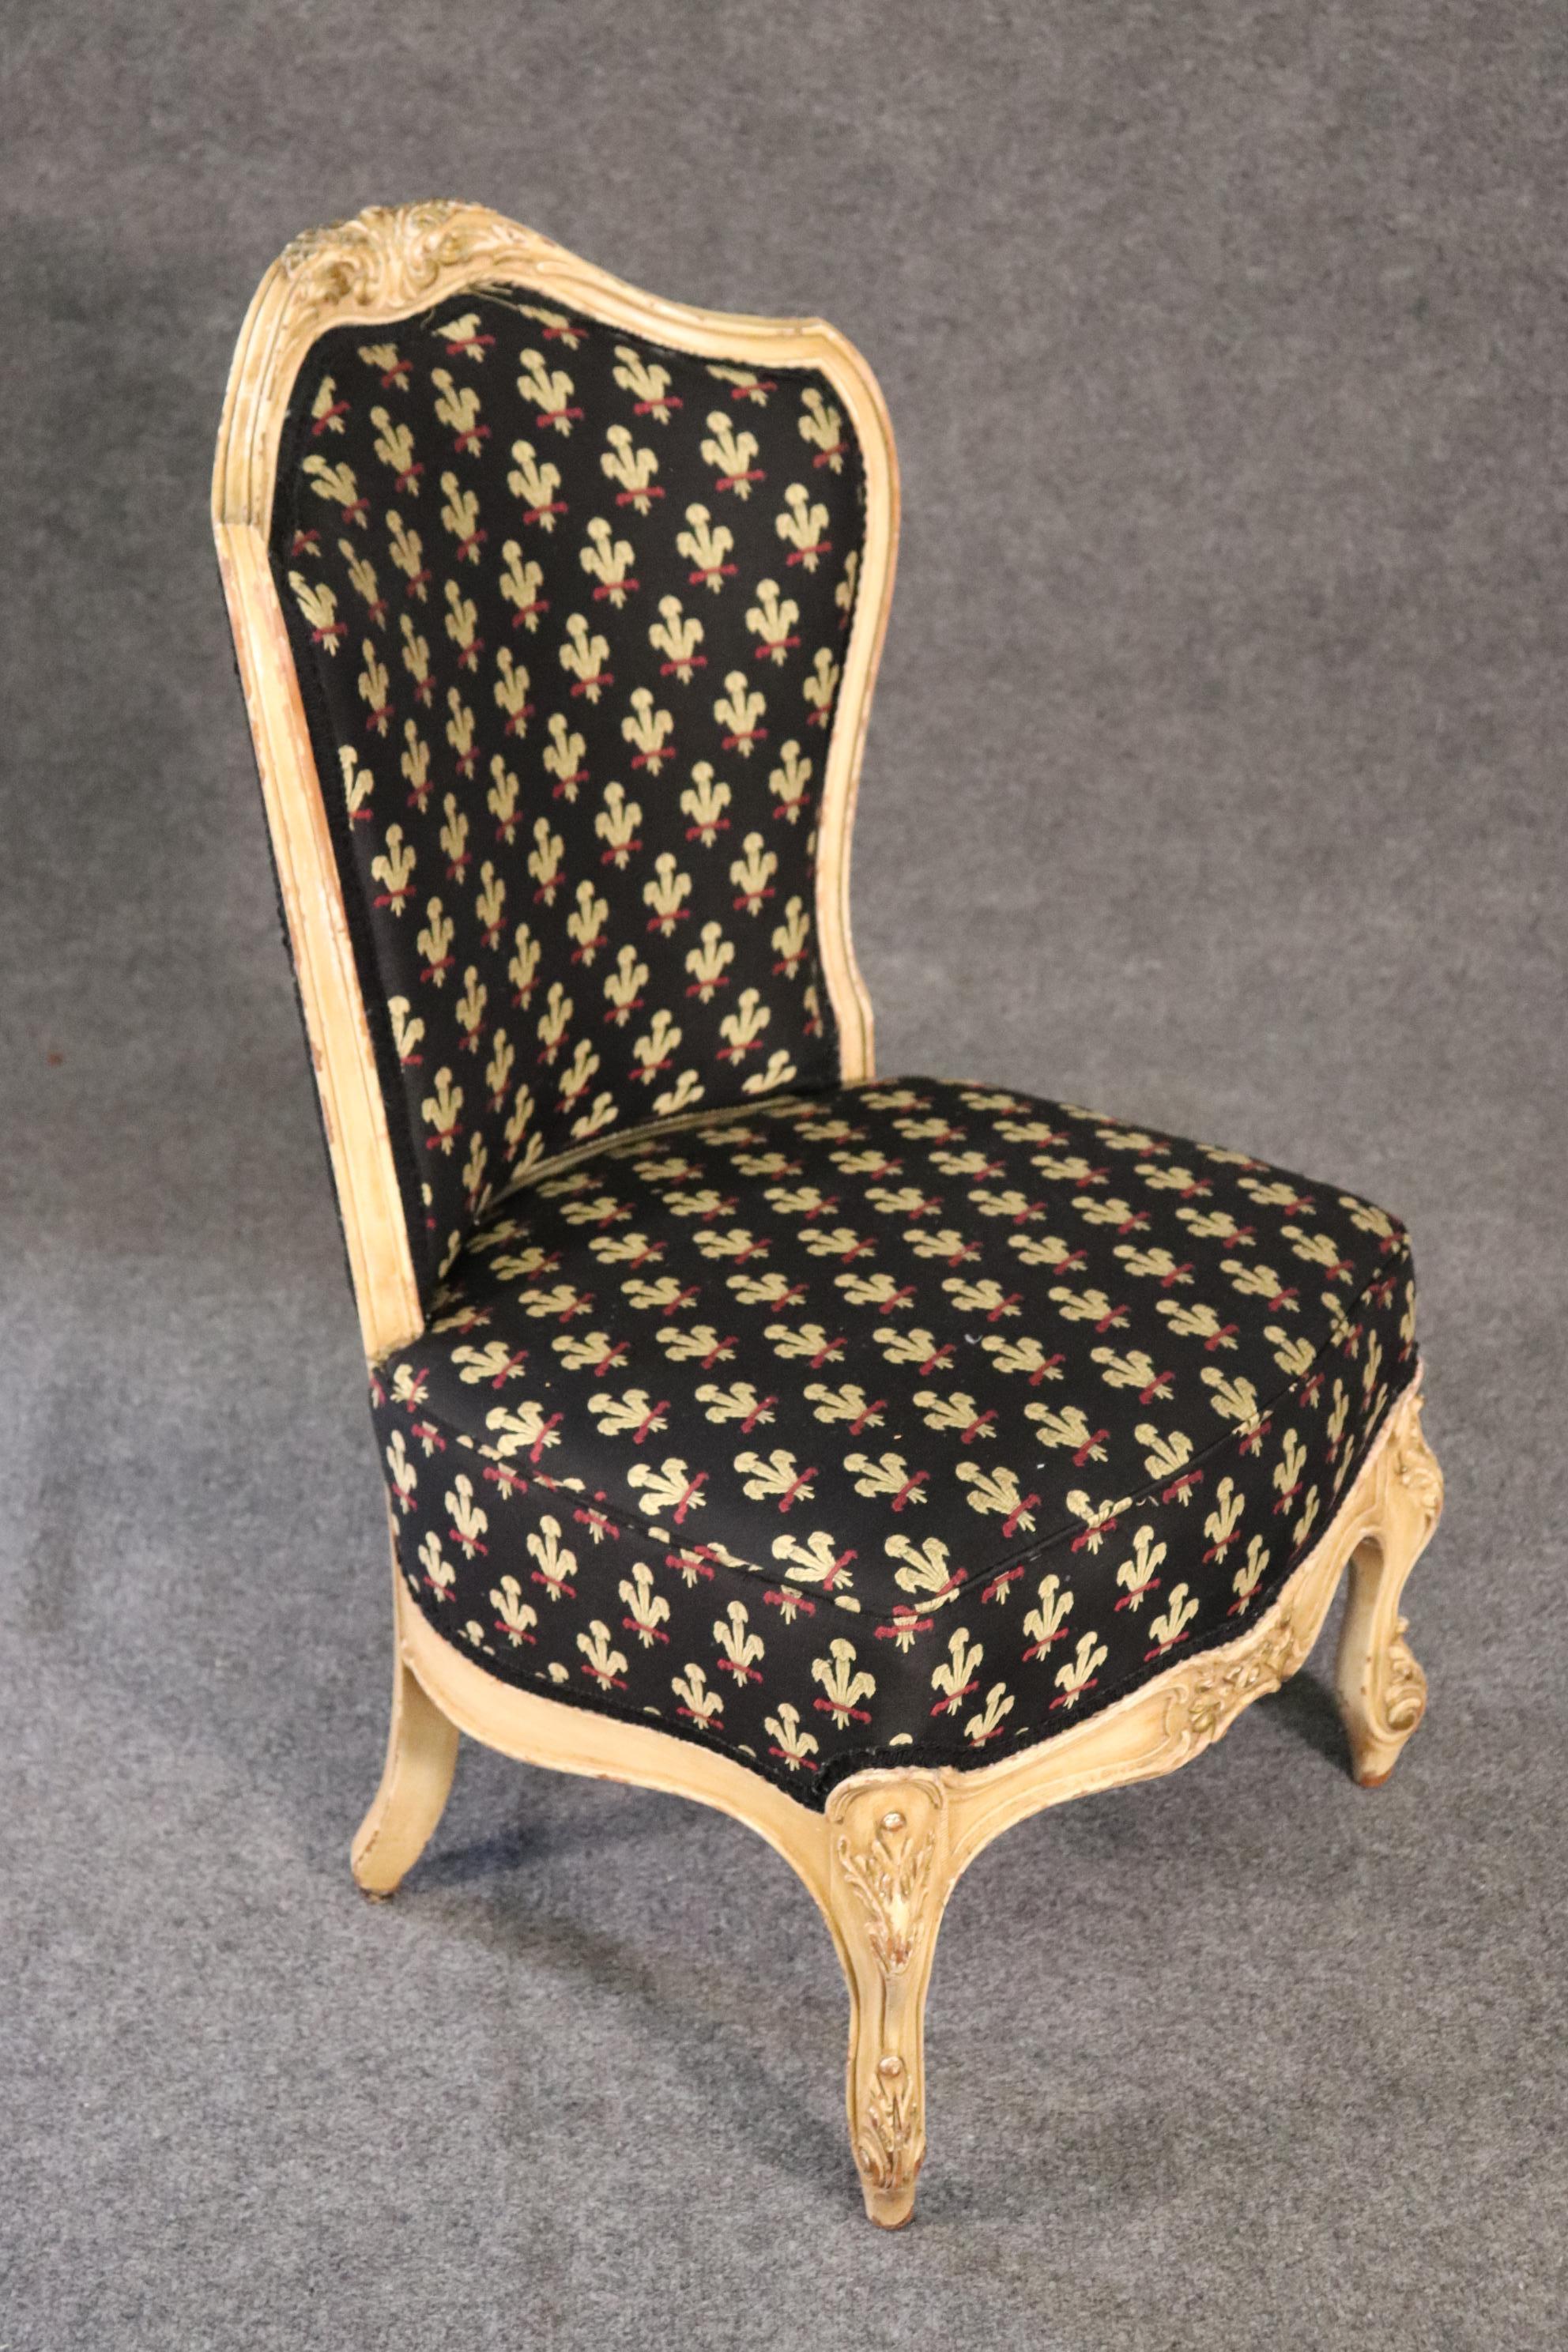 This is a nice way to add charm to your bedroom. This boudoir chair is a classic French Louis XV design that can easily blend into to any environment and add just enough class to set things off right. The chair dates to the 1900s era and is in